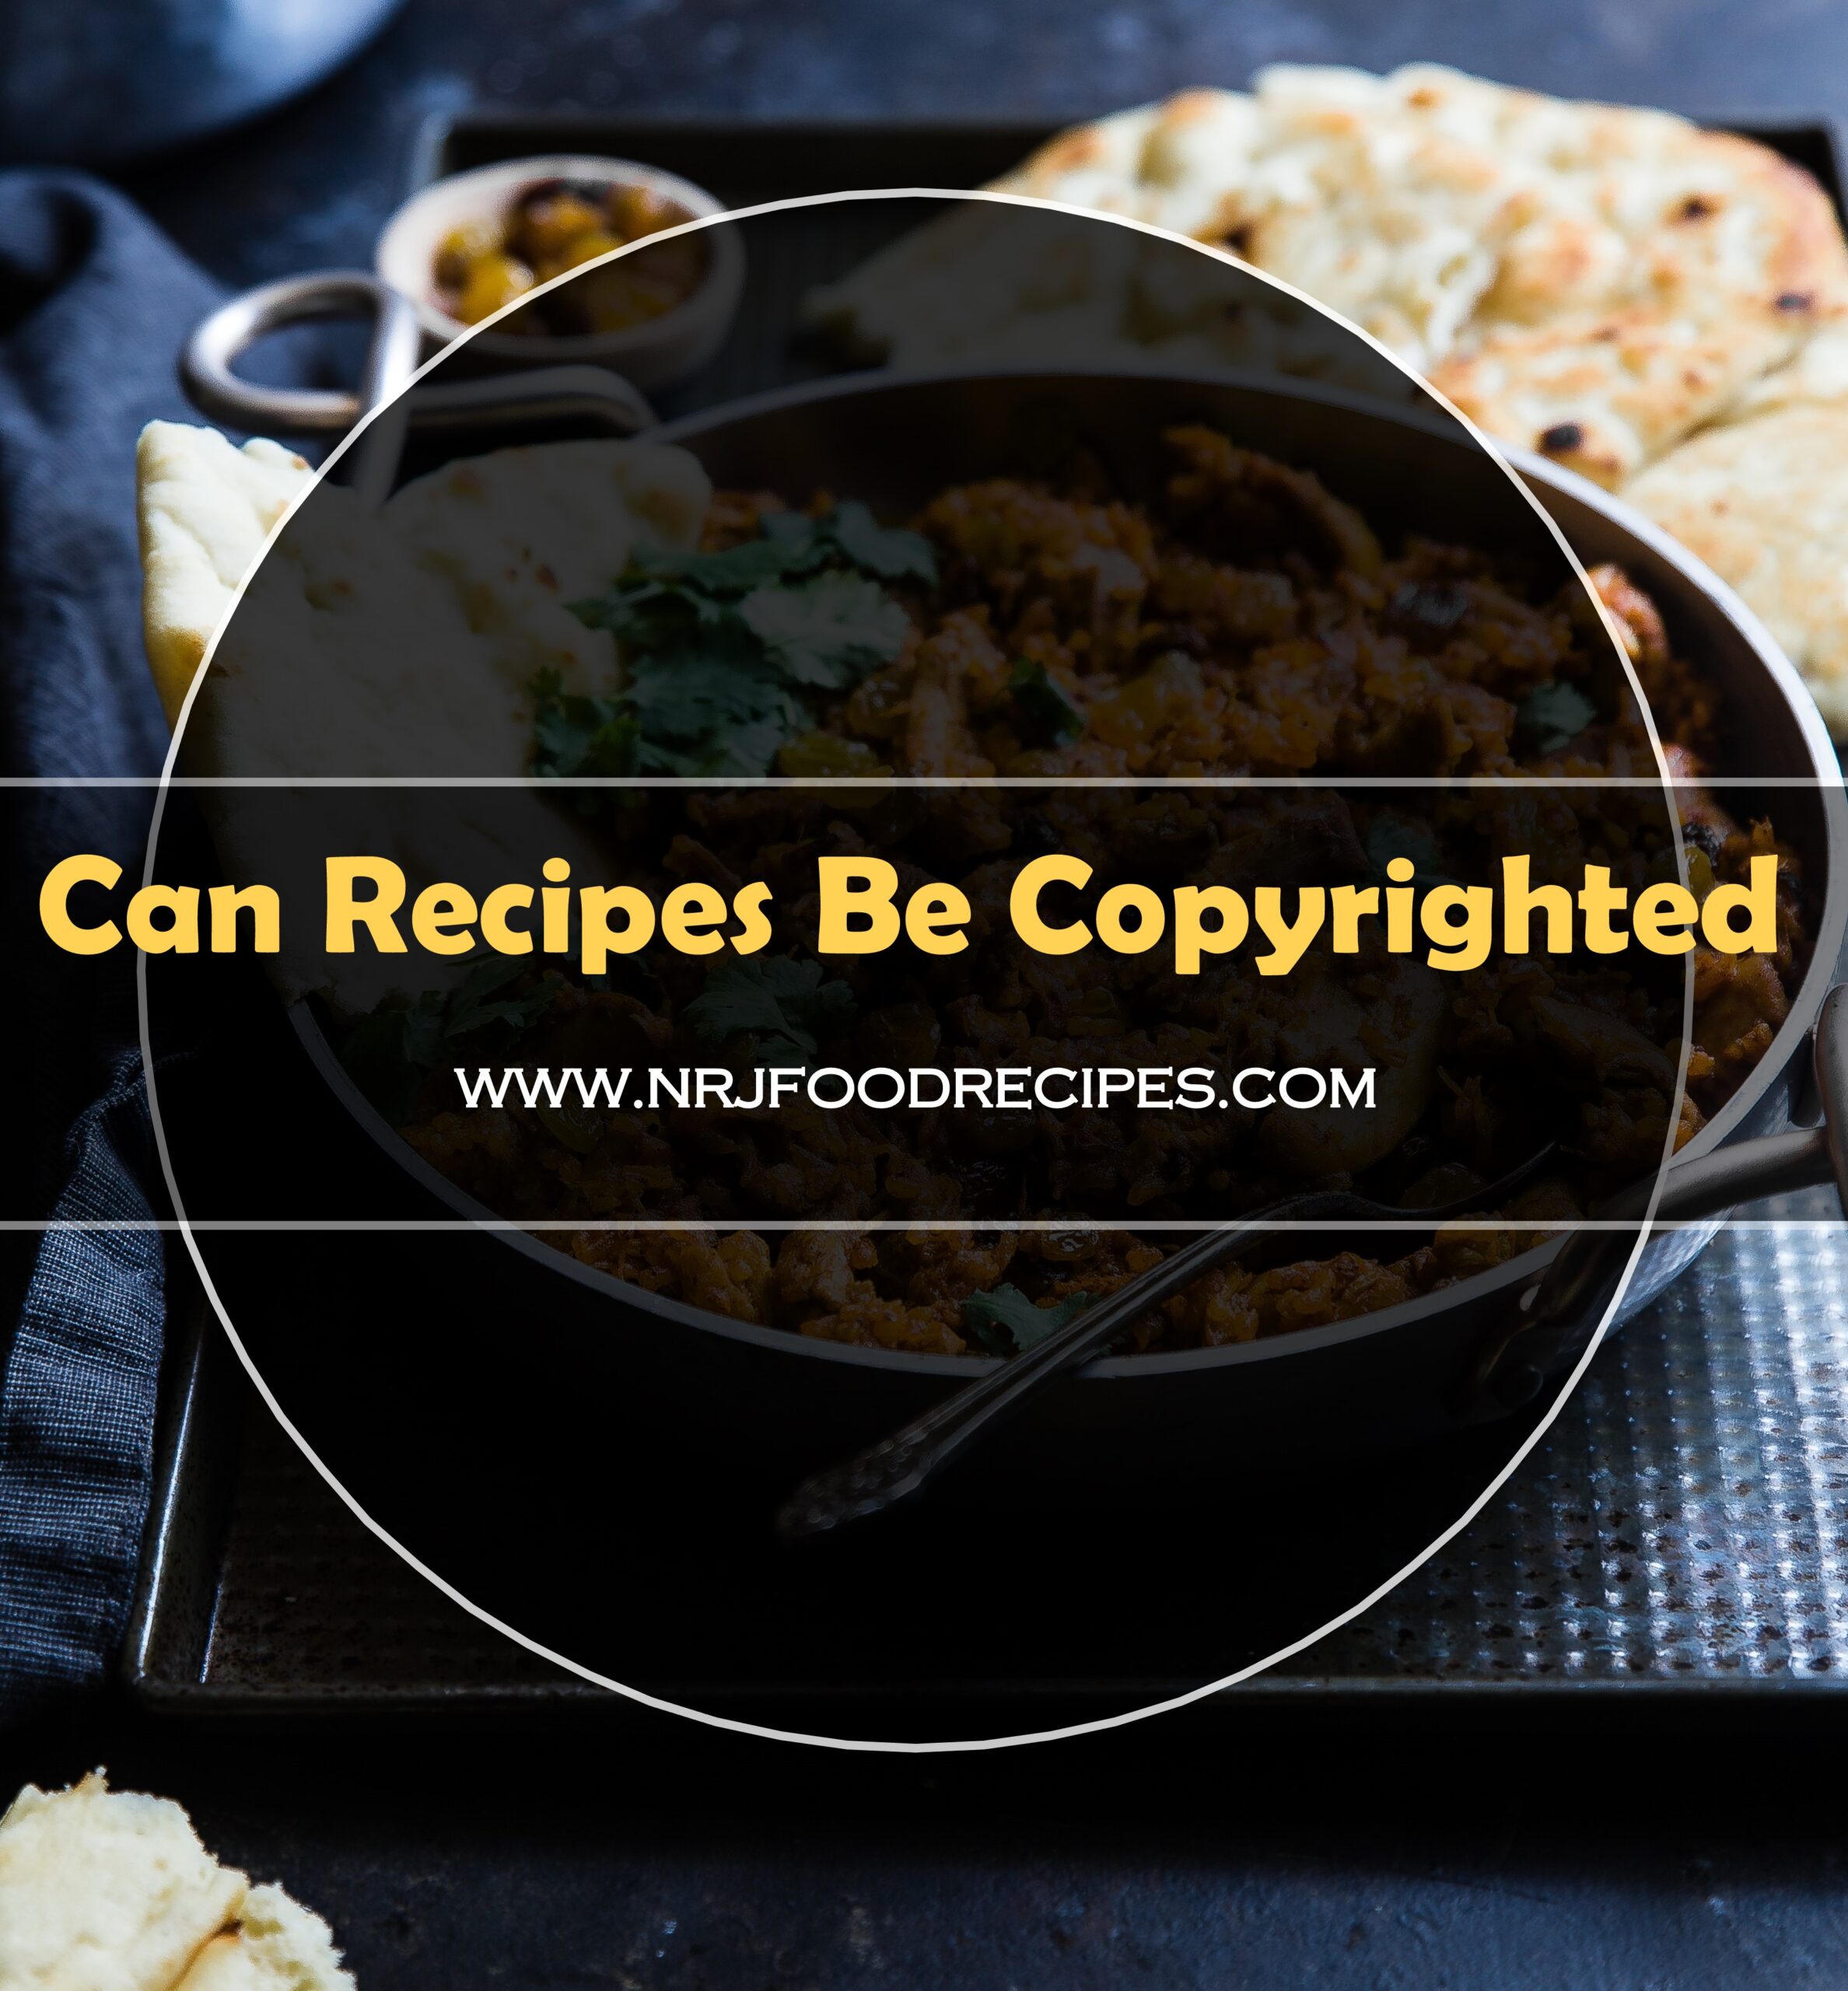 Can recipes be copyrighted or patented